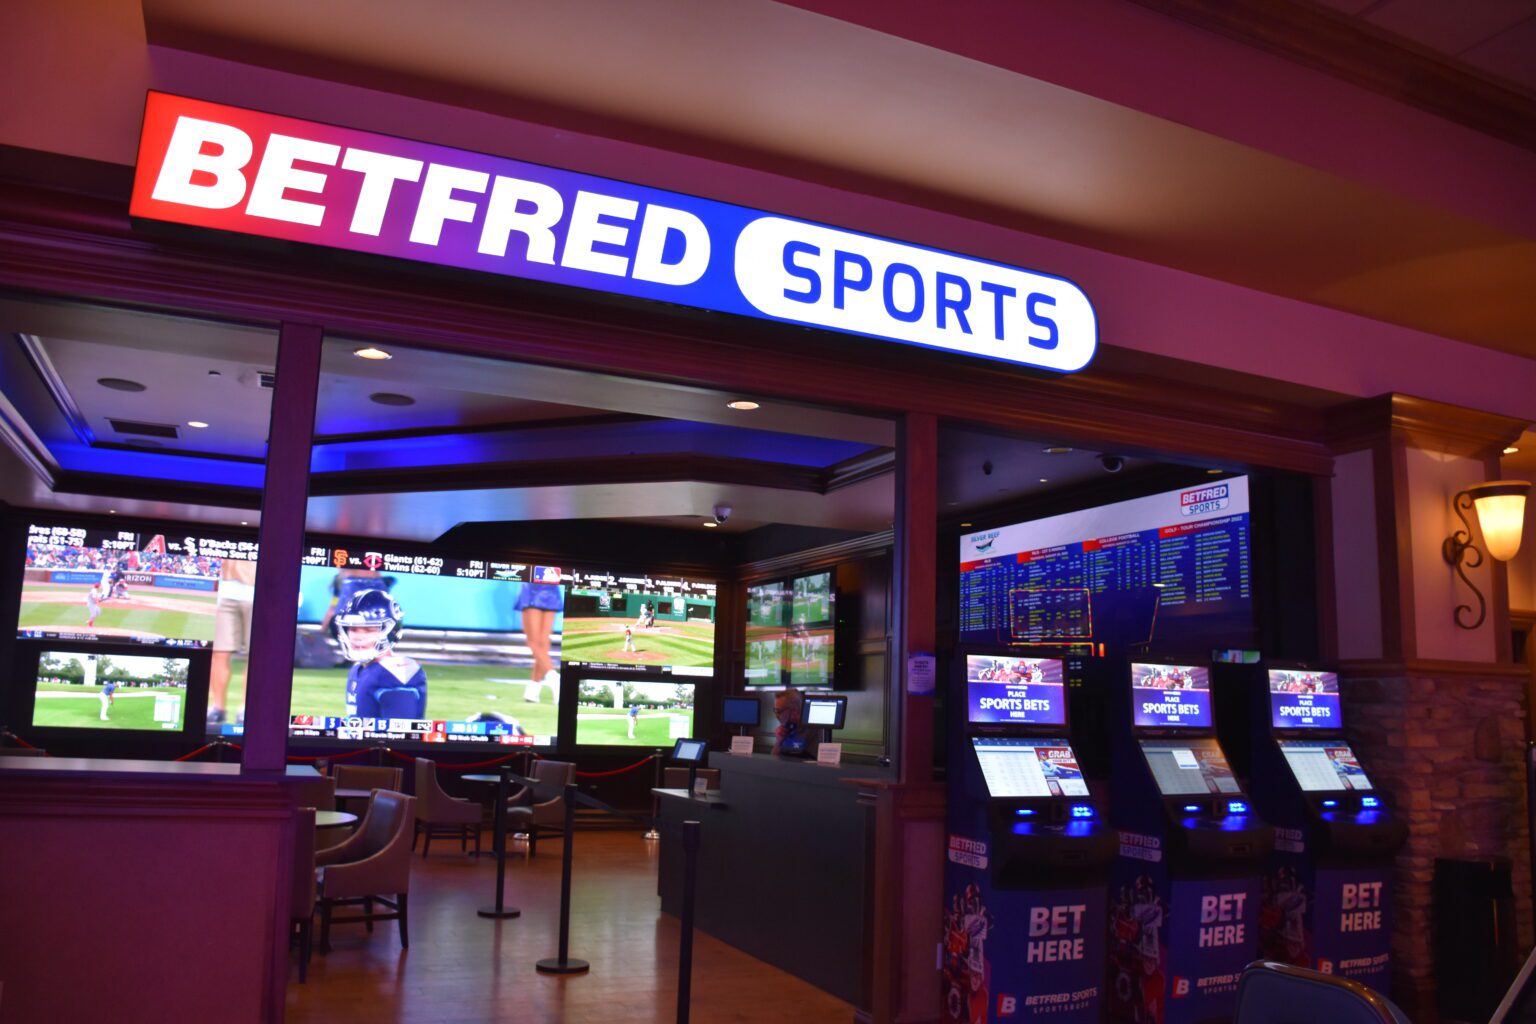 The new Betfred Sportsbook in the Silver Reef Casino Resort in Ferndale is having its grand opening on Aug. 31.